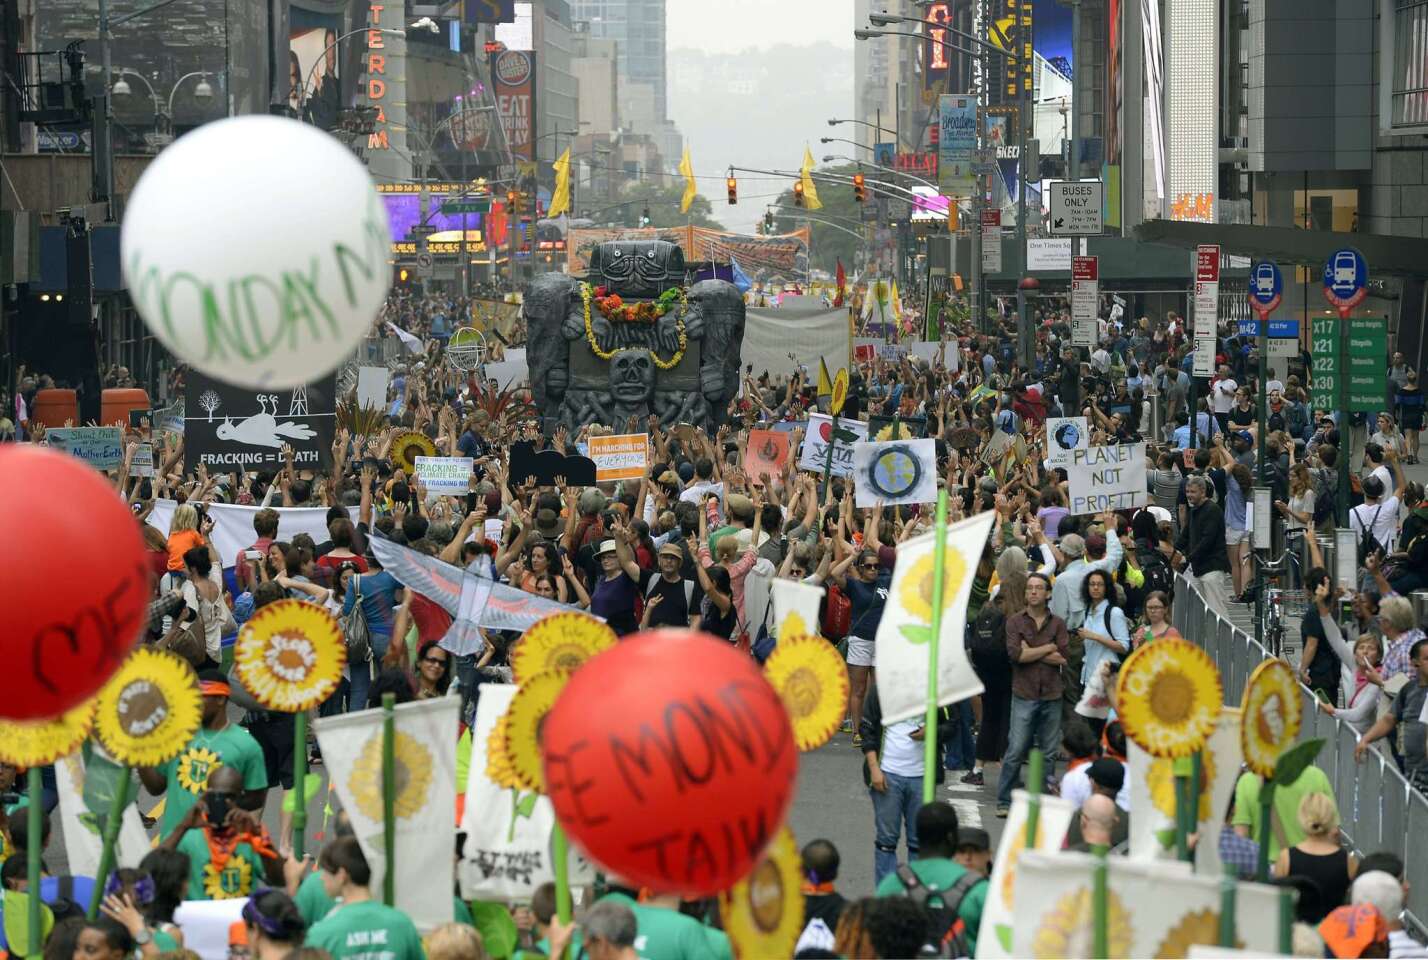 A marchers come down 6th Ave during the People's Climate March on September 21 2014, in New York.